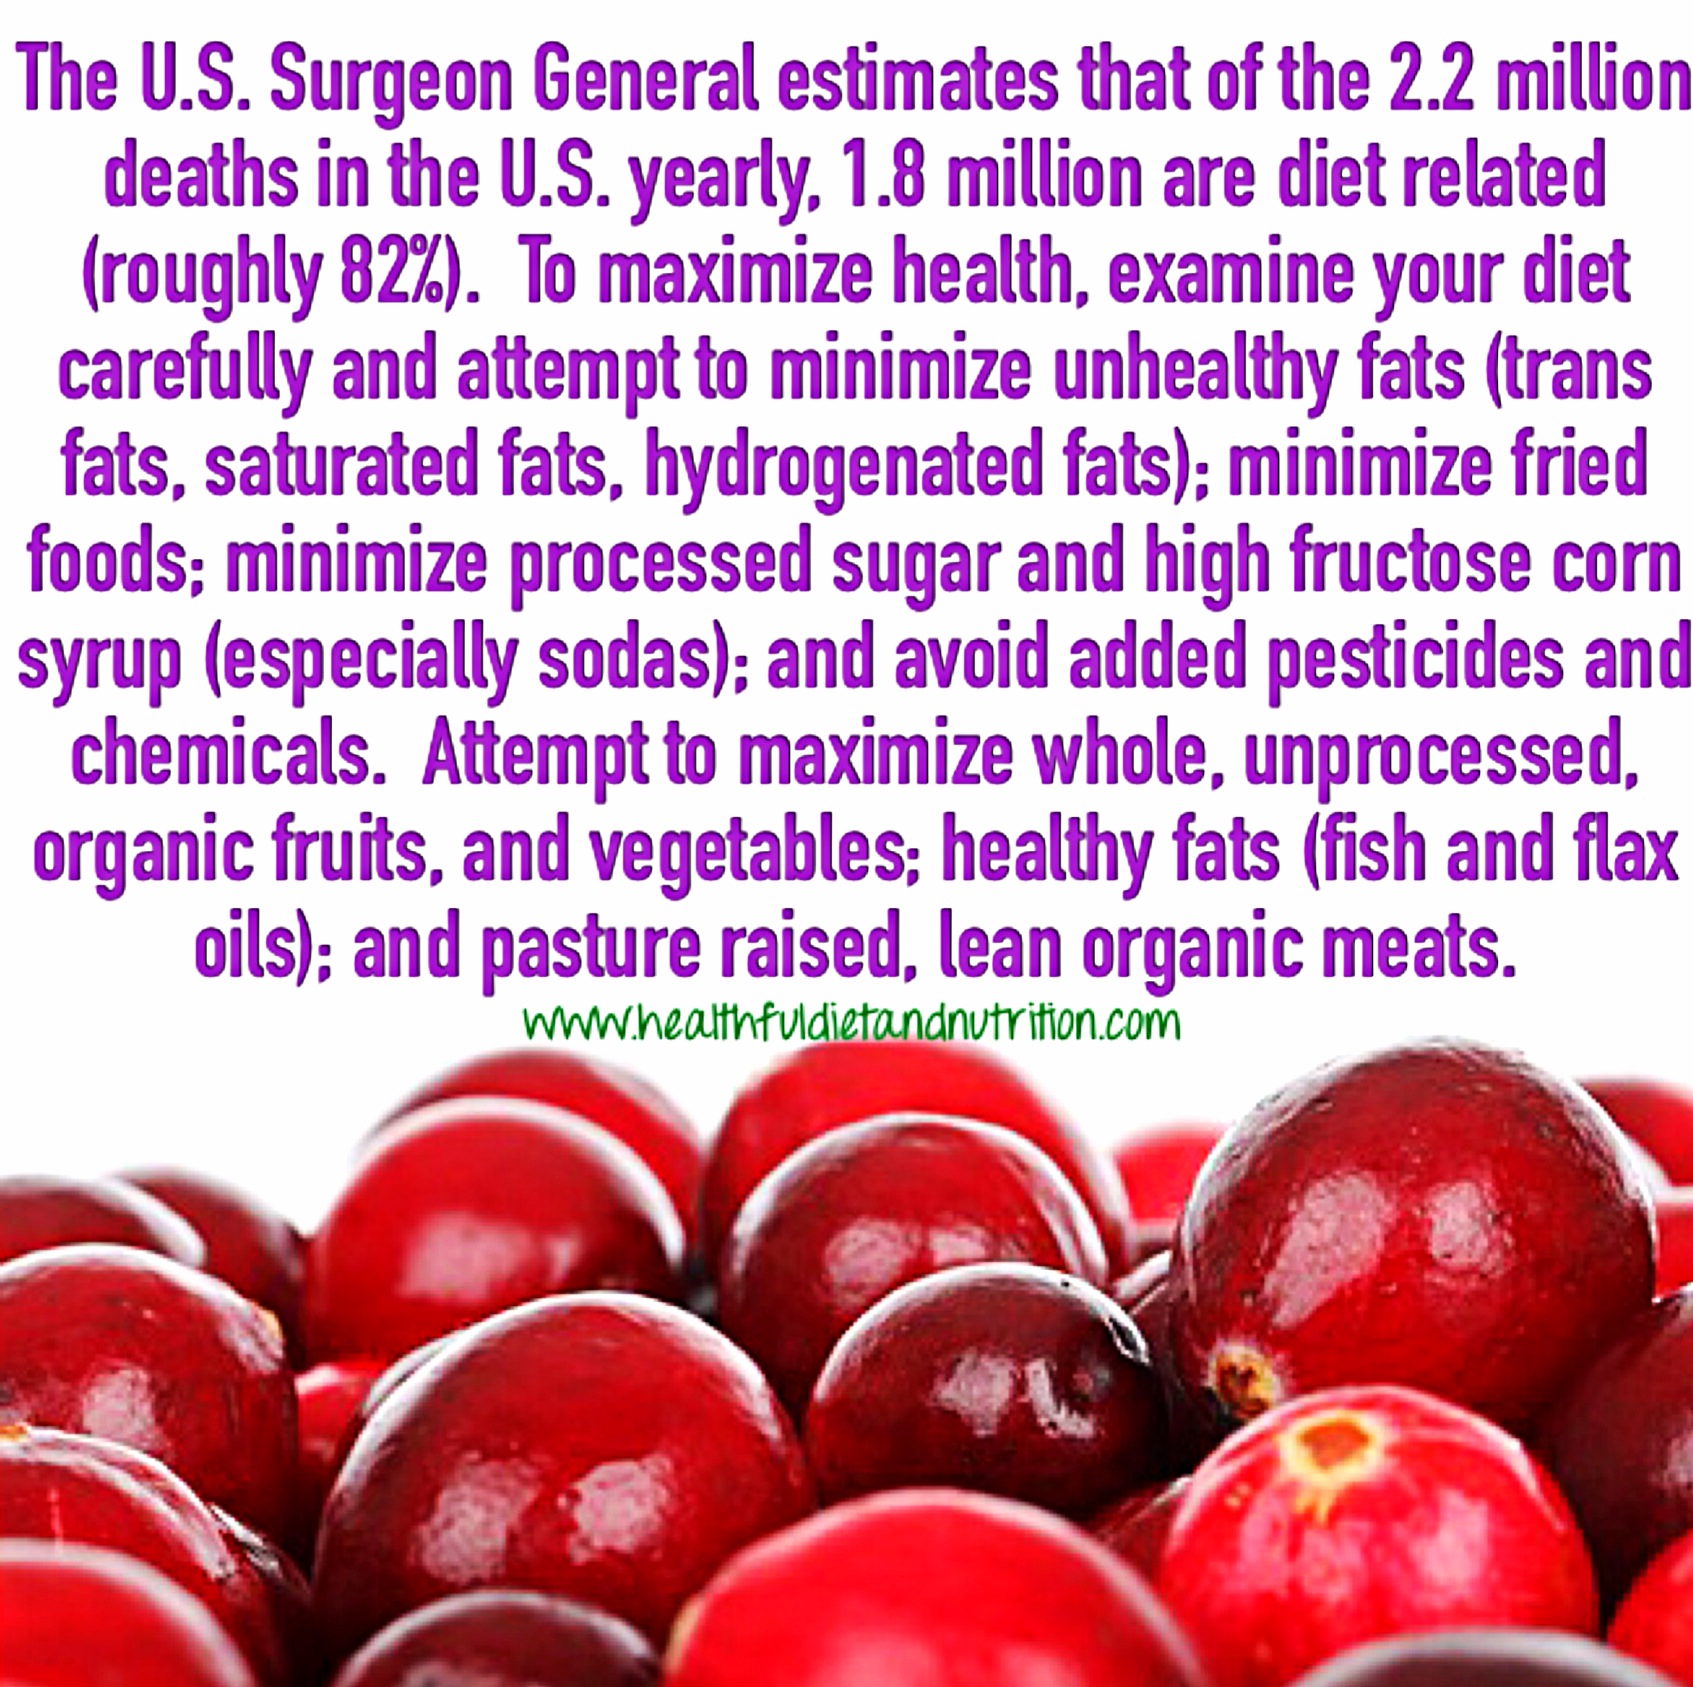 The U.S Surgeon General estimates that of the 2.2million deaths in the U.S. yearly, 1-8million are diet related (roughly 82%). To maximize health, examine your diet carefully and attempt to minimize unhealthy fats (trans fats, saturated fats, hydrogenated fats); minimize fried foods; minimize processed sugar and high fructose corn syrup (especially sodas); and avoid added pesticides and chemicals. Attempt to maximize whole, unprocessed, organic fruits, and vegetables; healthy fats (fish and flax oils); and pasture raised, lean organic meats.